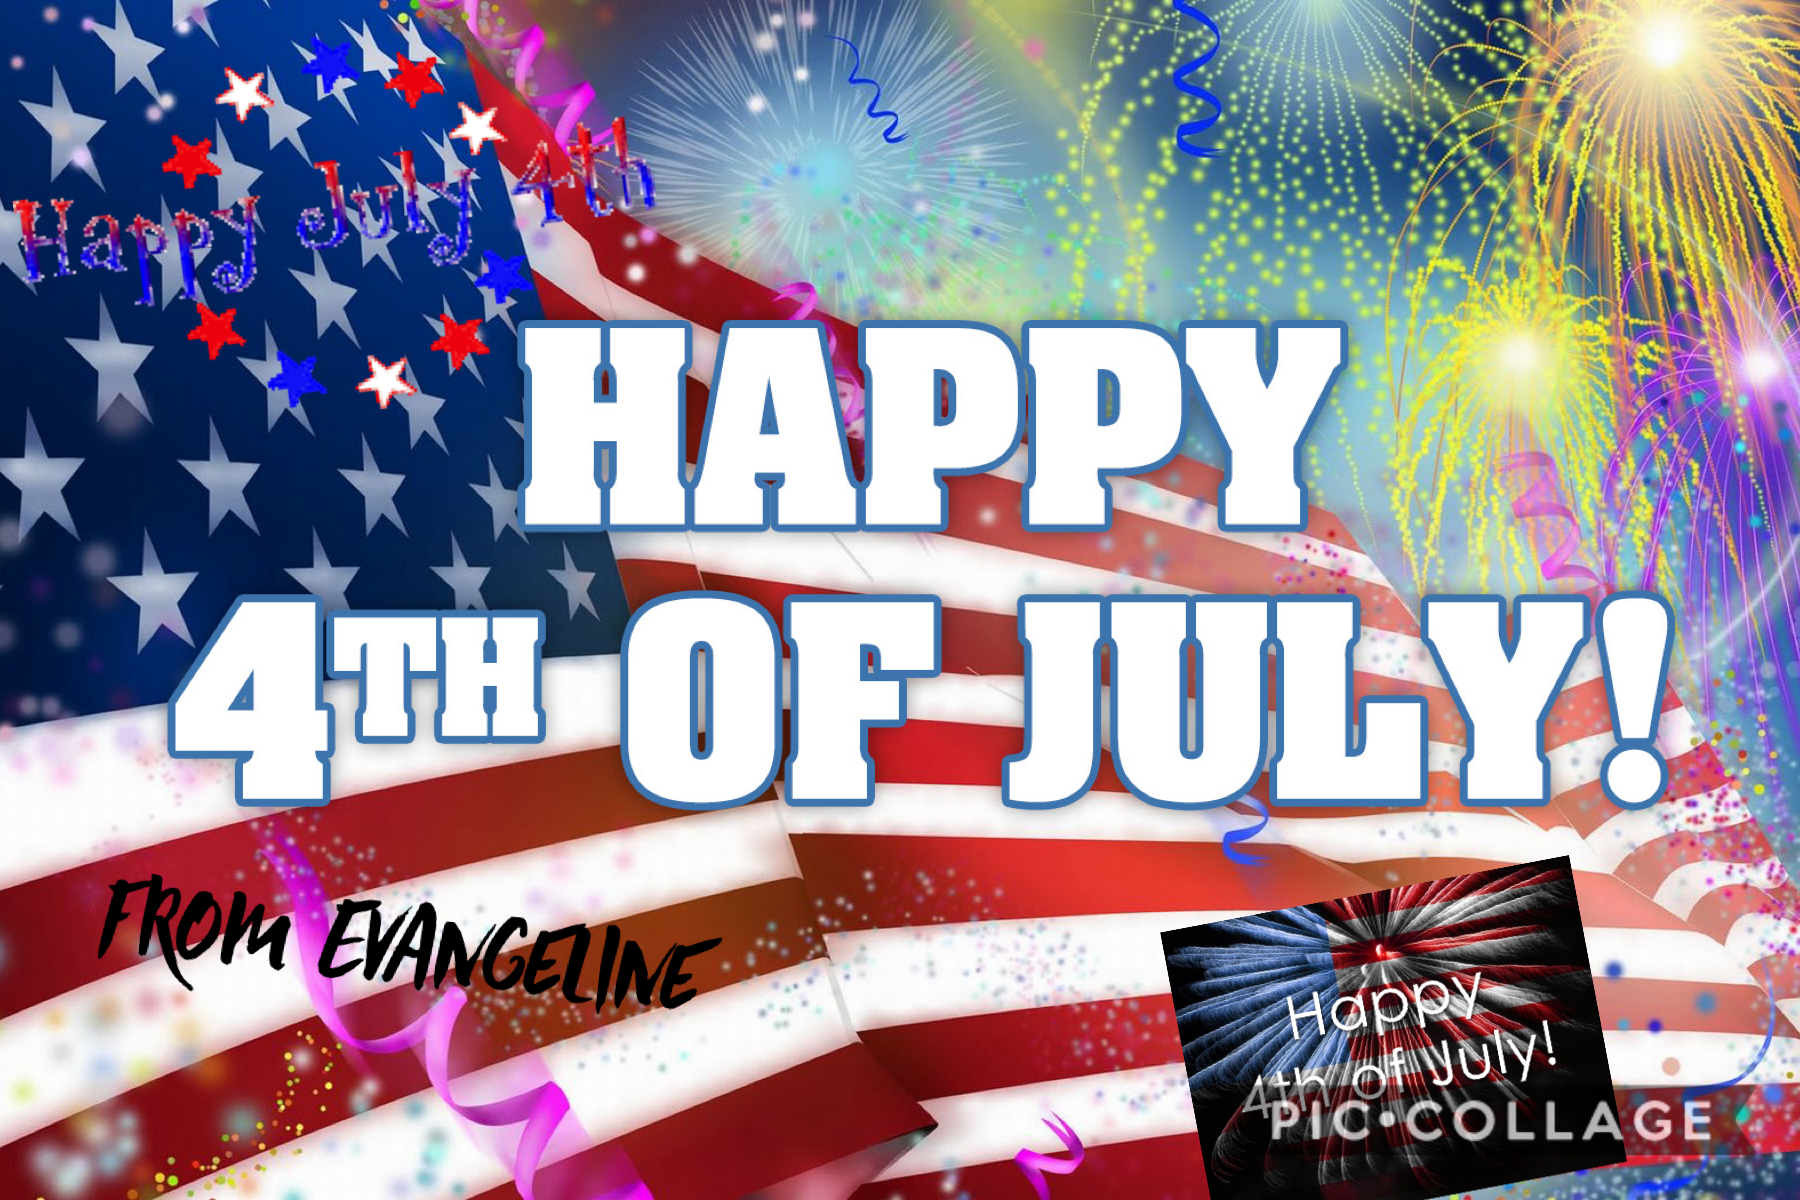 Happy 4th of July to all f you